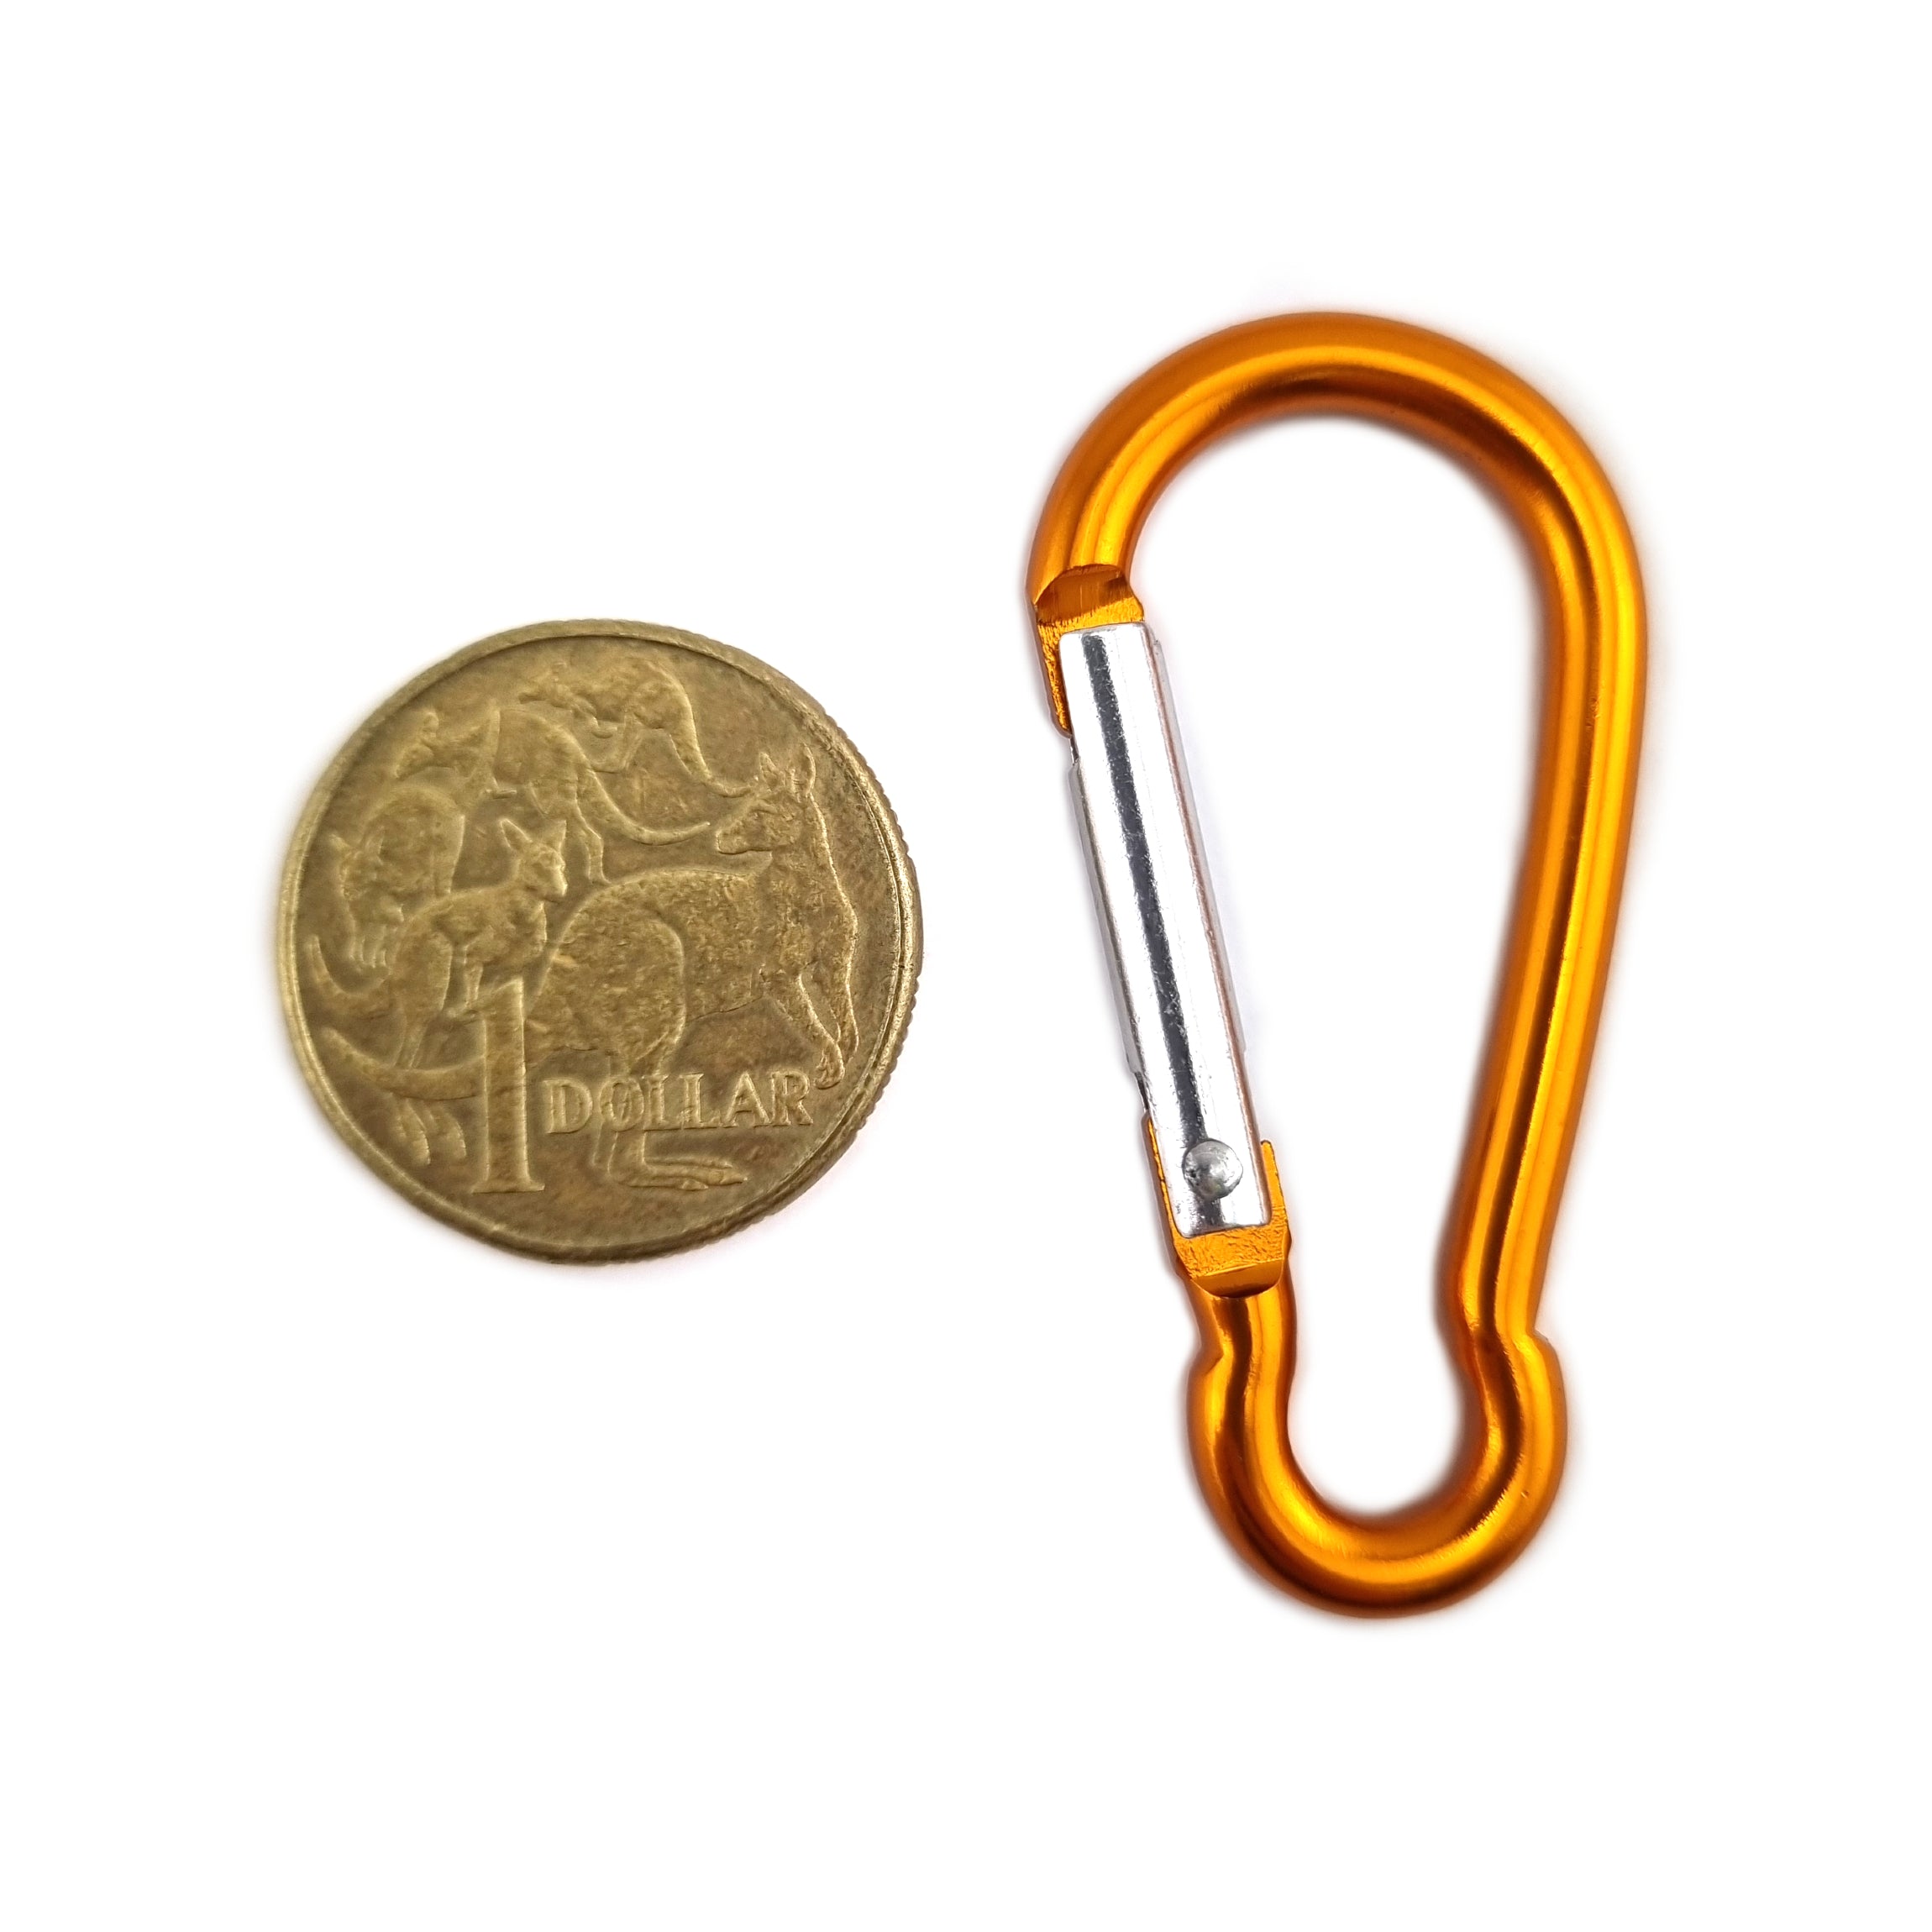 Aluminium snap hook carabiner in orange, size 4mm, untested. Shop hardware online at chain.com.au